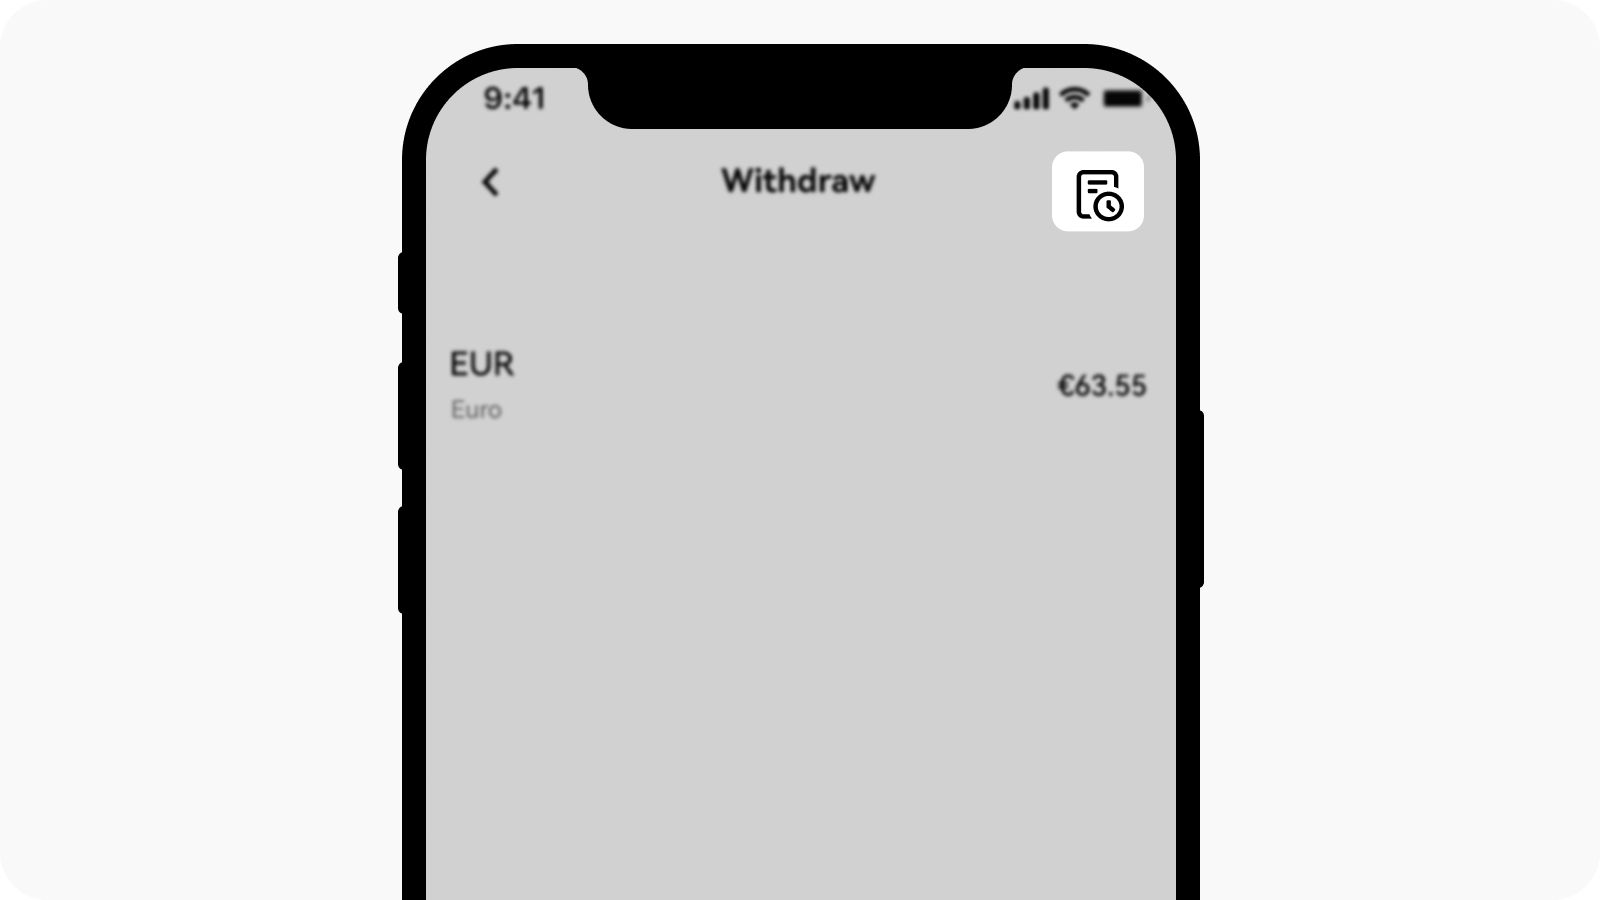 CT-app-cash withdraw-withdrawal history